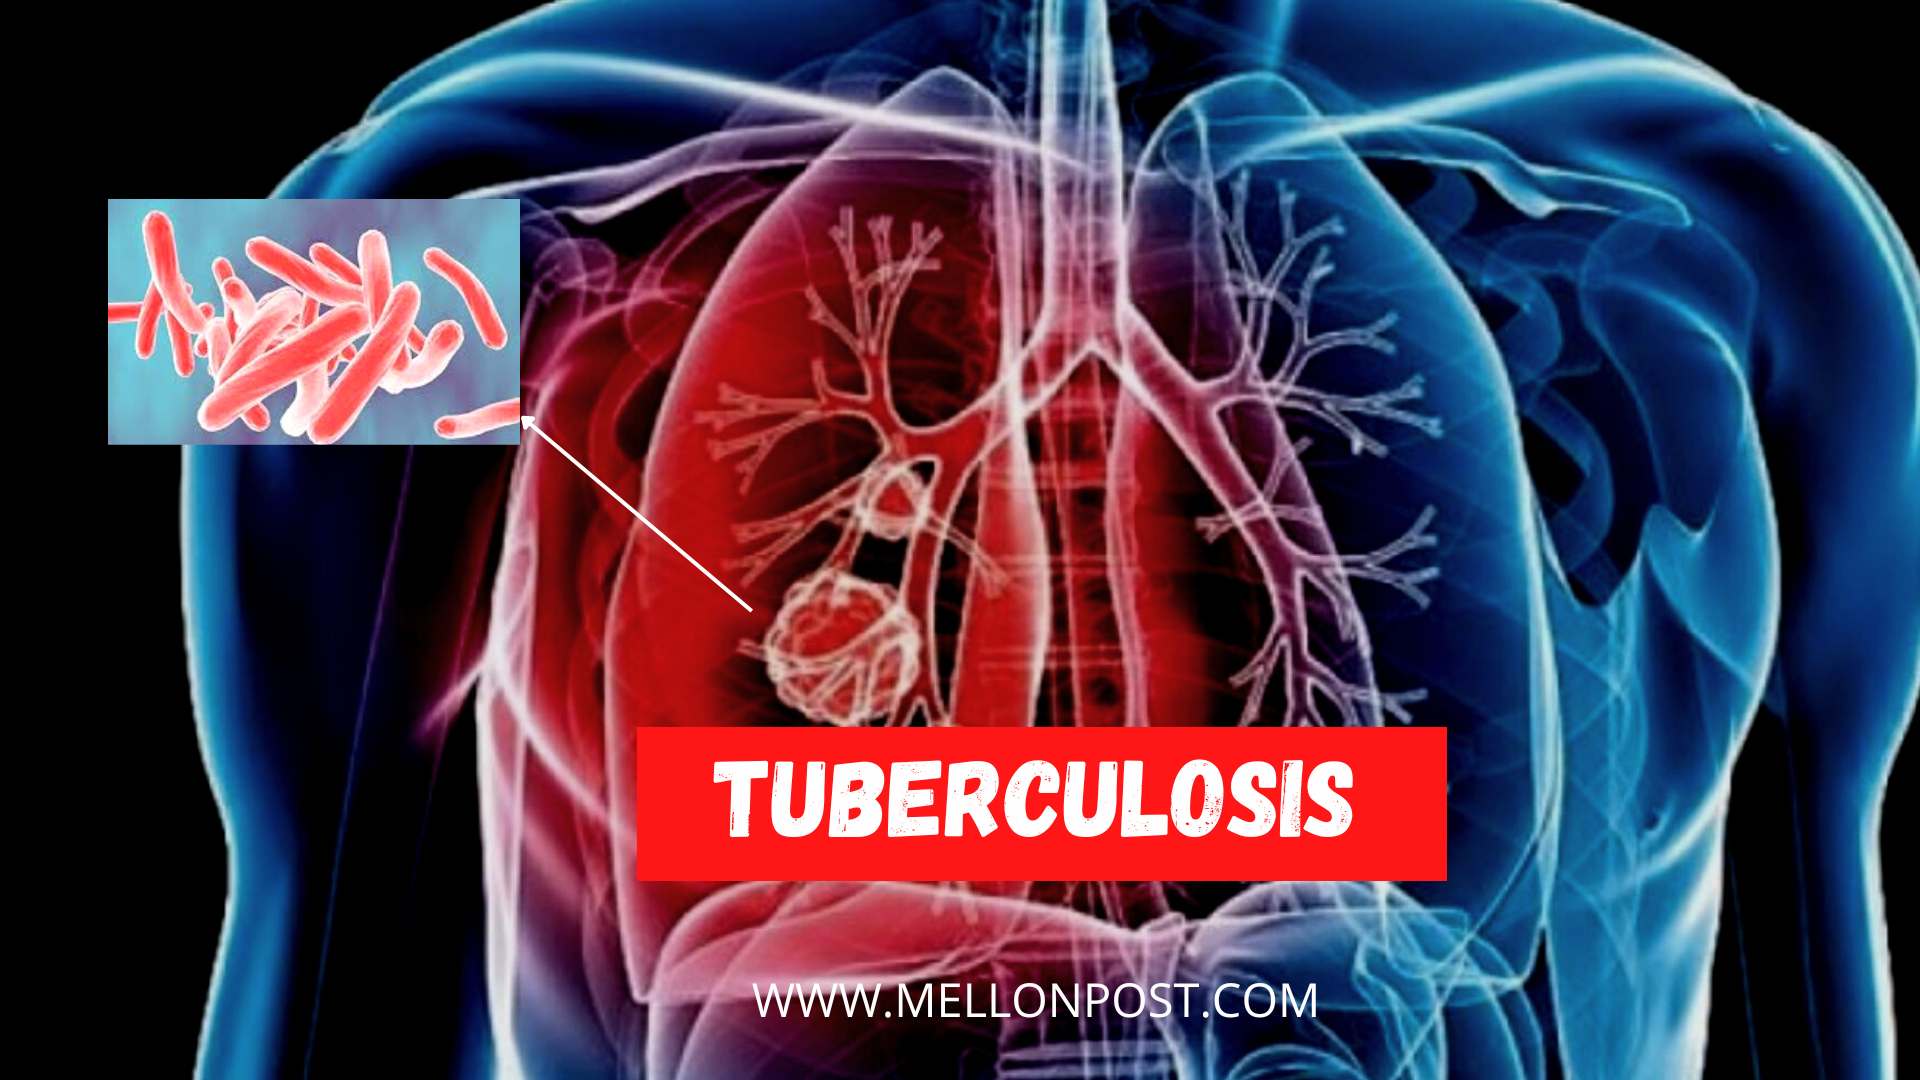 Tuberculosis: Causes, Symptoms, and Treatment